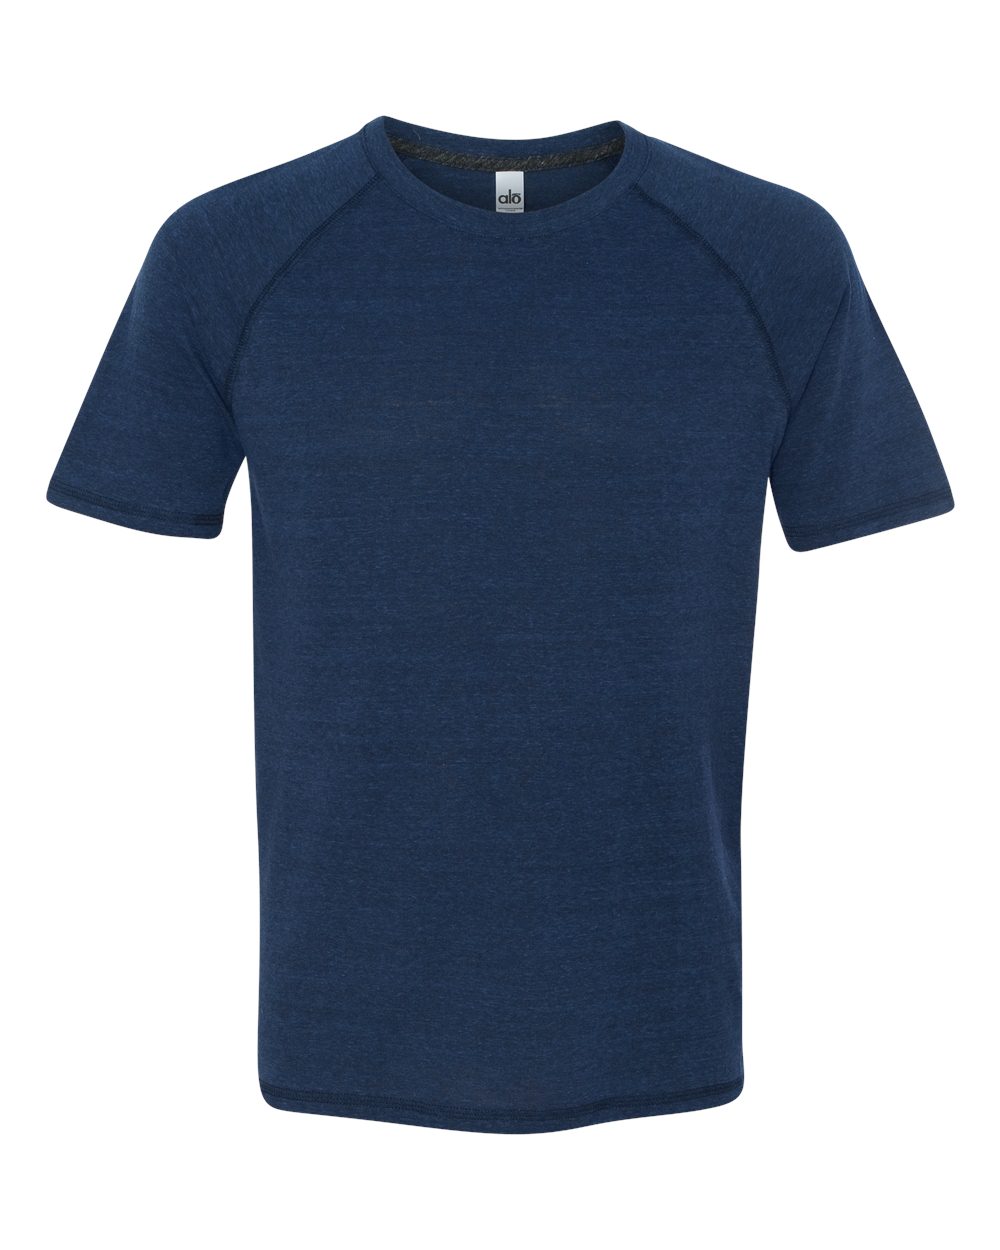 click to view Navy Heather Triblend